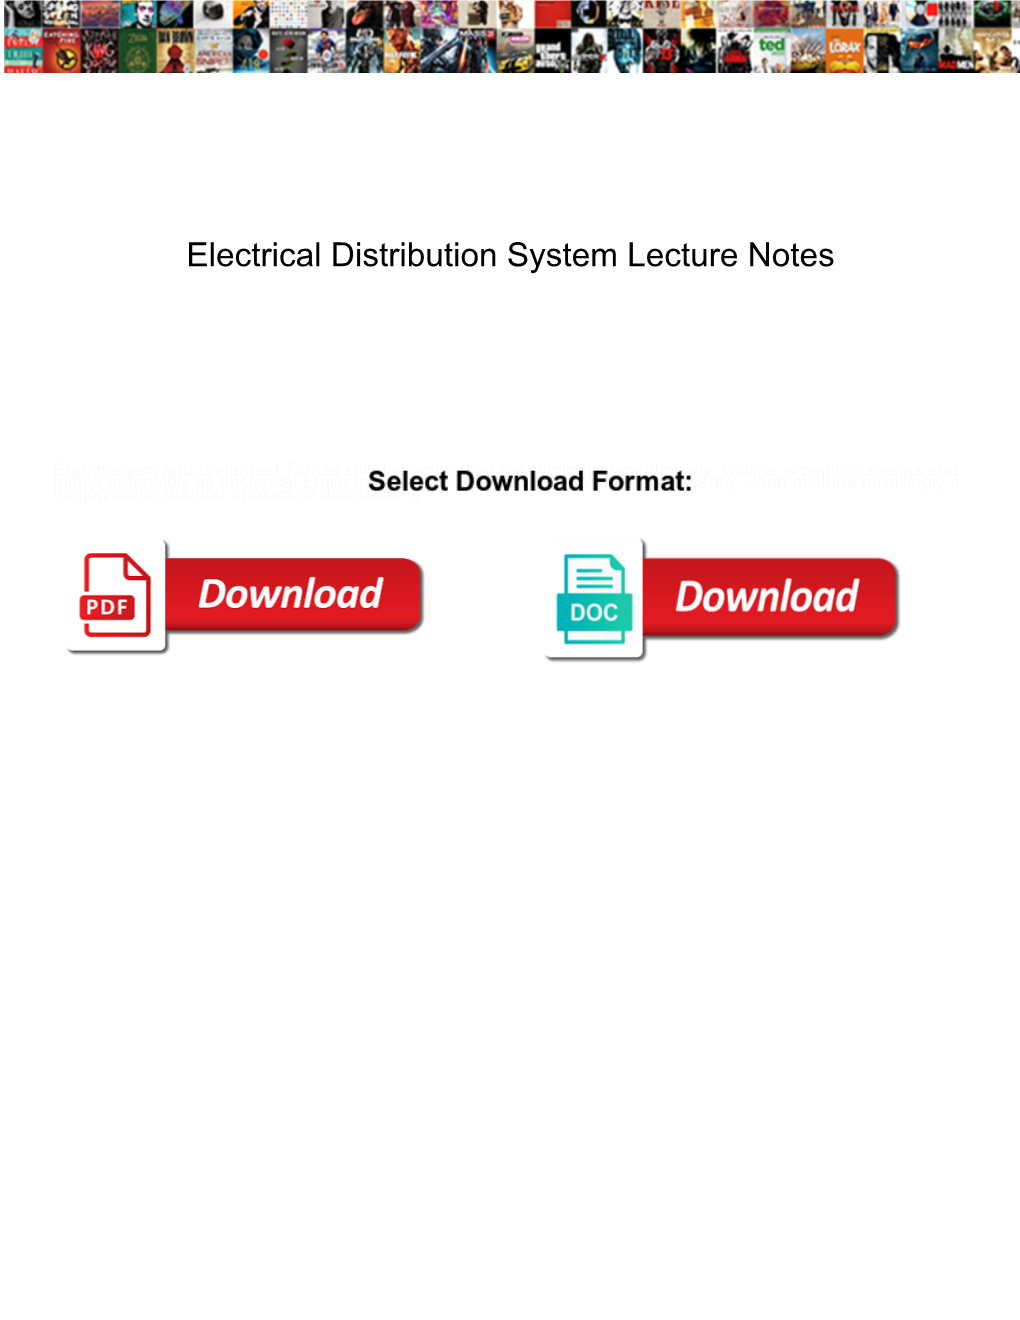 Electrical Distribution System Lecture Notes